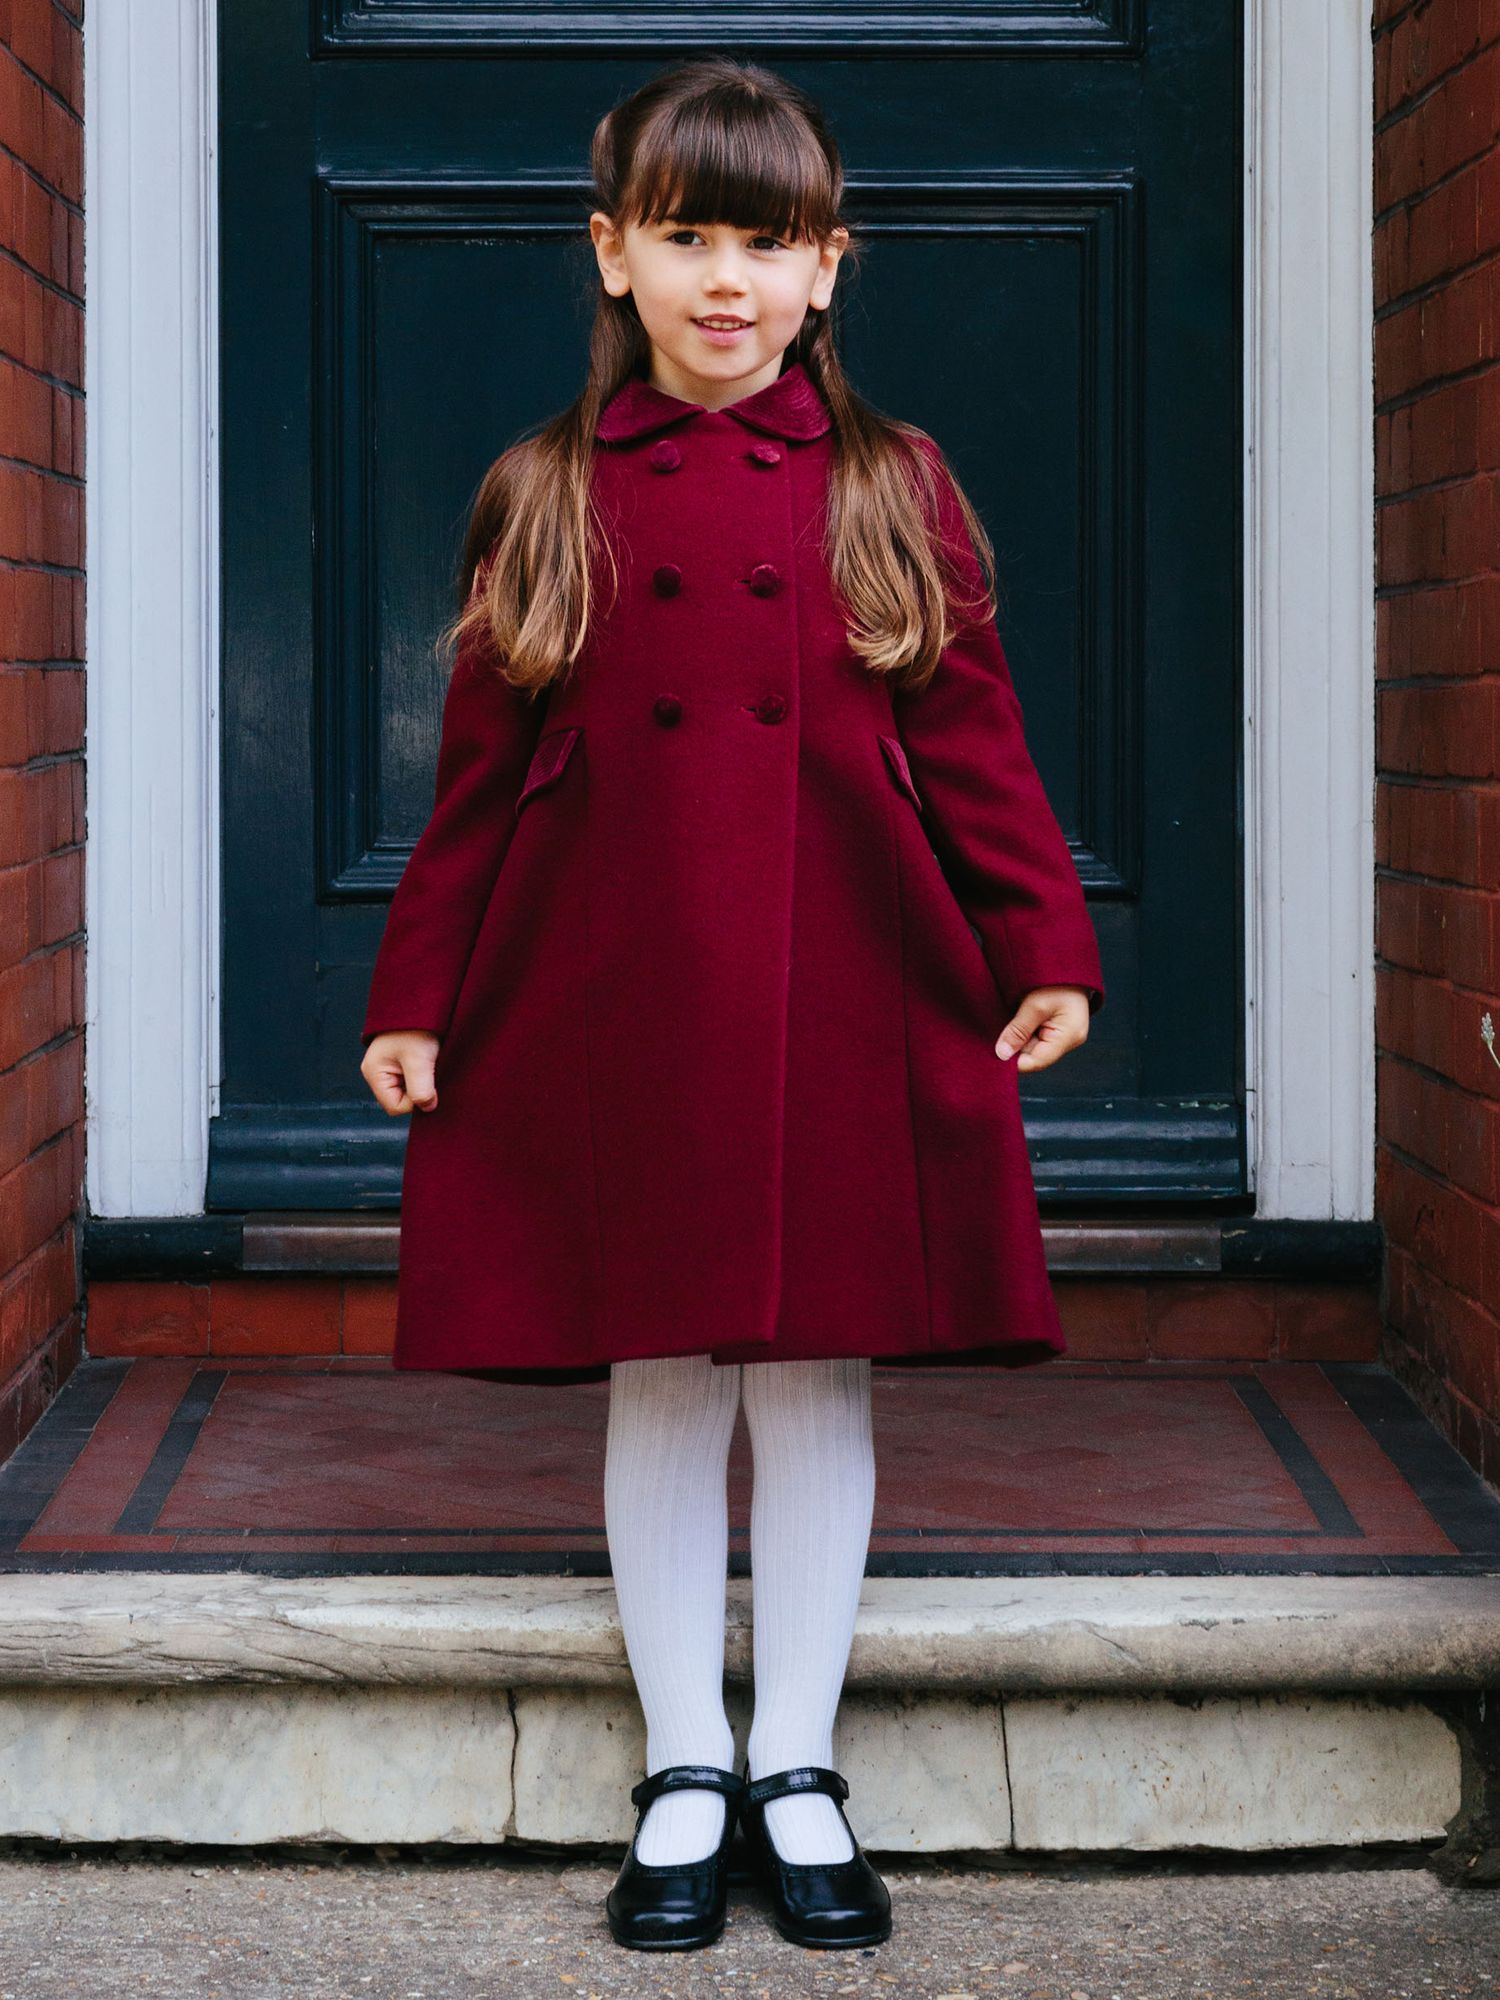 Trotters Kids' Classic Double Breasted Coat, Burgundy at John Lewis ...